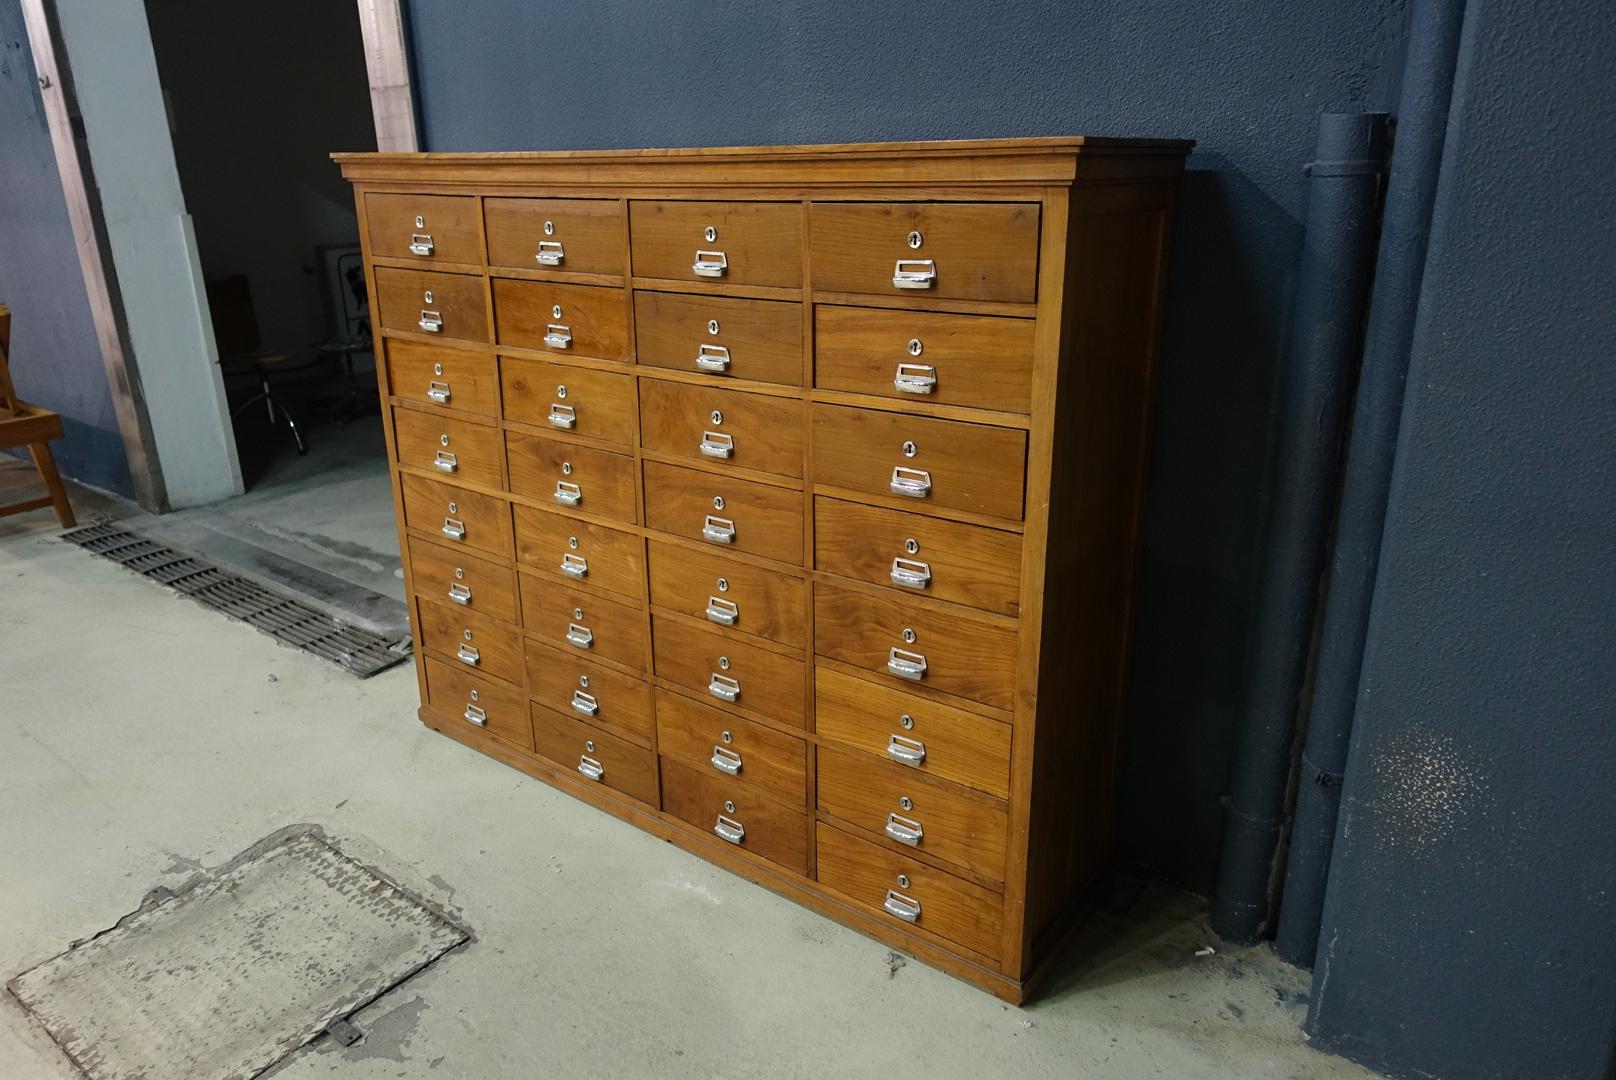 Industrial Portuguese Oakwood Chest of 32 Drawers, circa 1940 (Mitte des 20. Jahrhunderts)